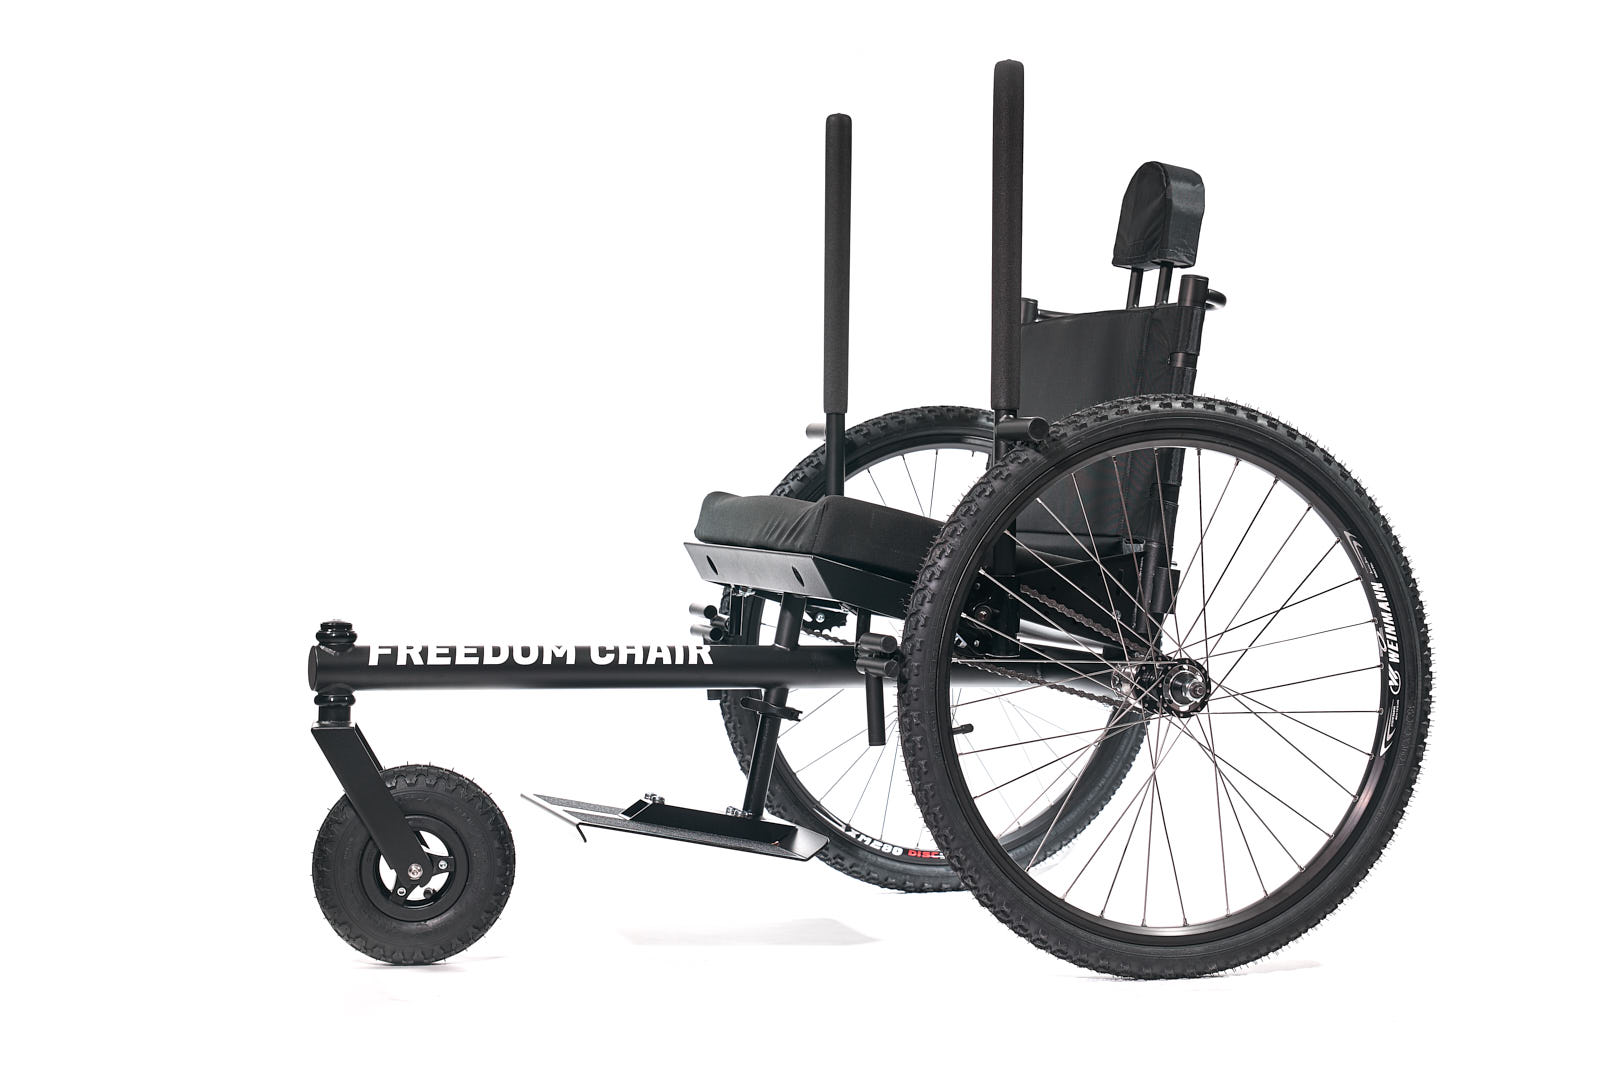 GRIT Freedom Chair 3.0 — GRIT Freedom Chair